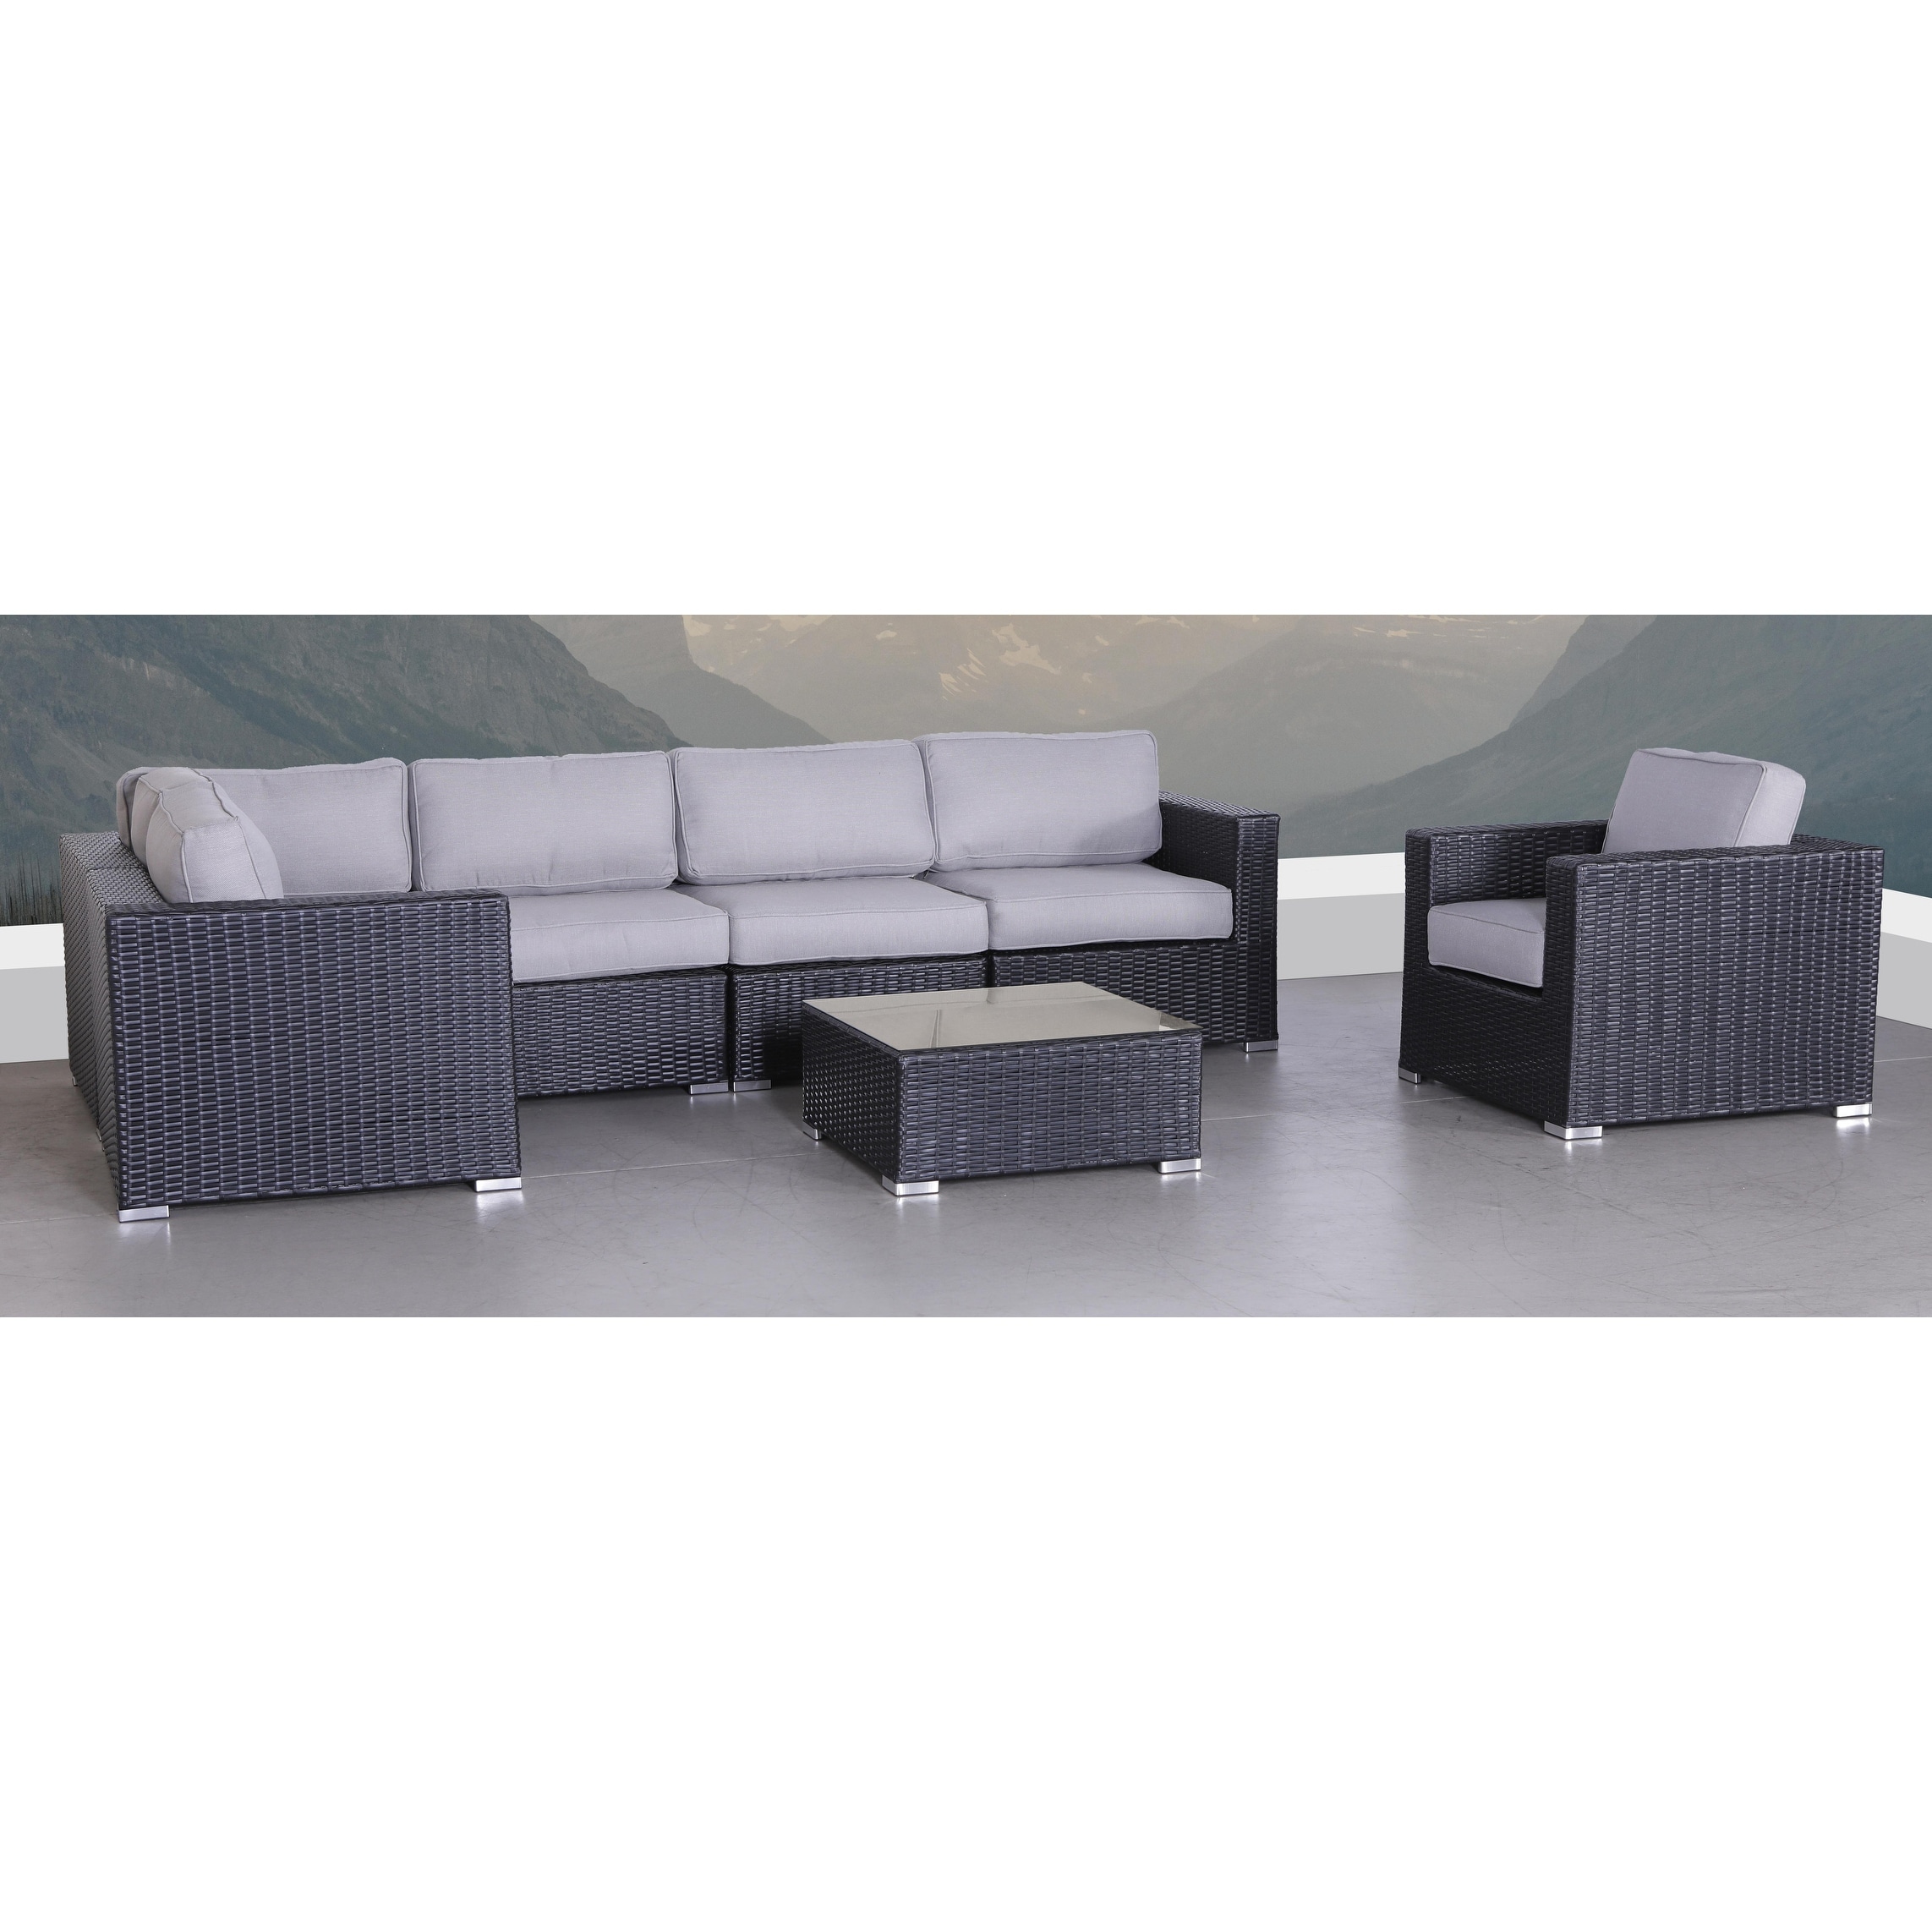 Lsi 7 Piece Sectional Seating Group With Cushion